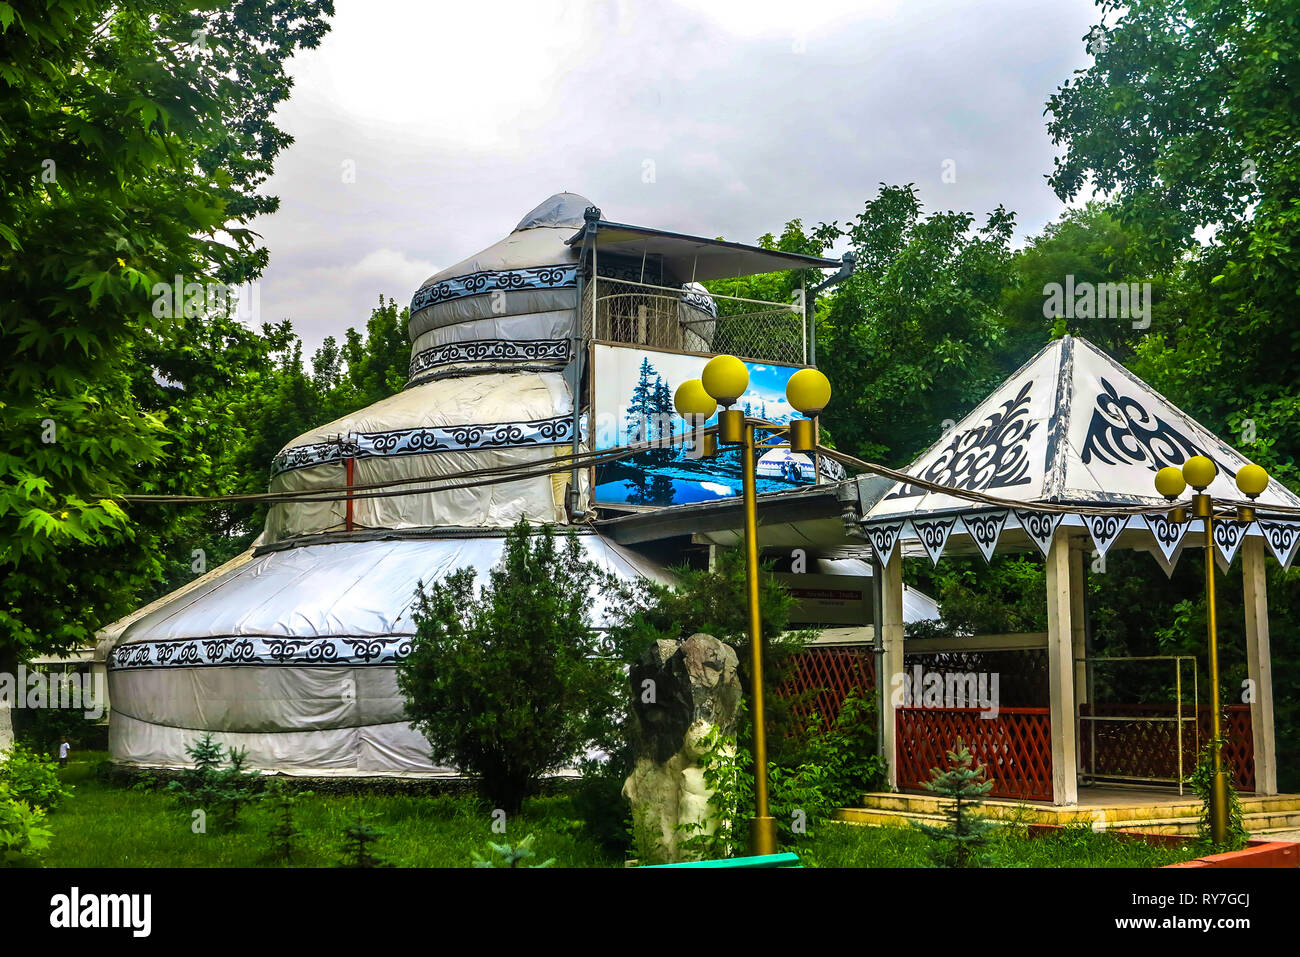 Osh Traditional Kyrgyzstan Three Story Yurt at Sulayman Mountain Too Public Park Stock Photo